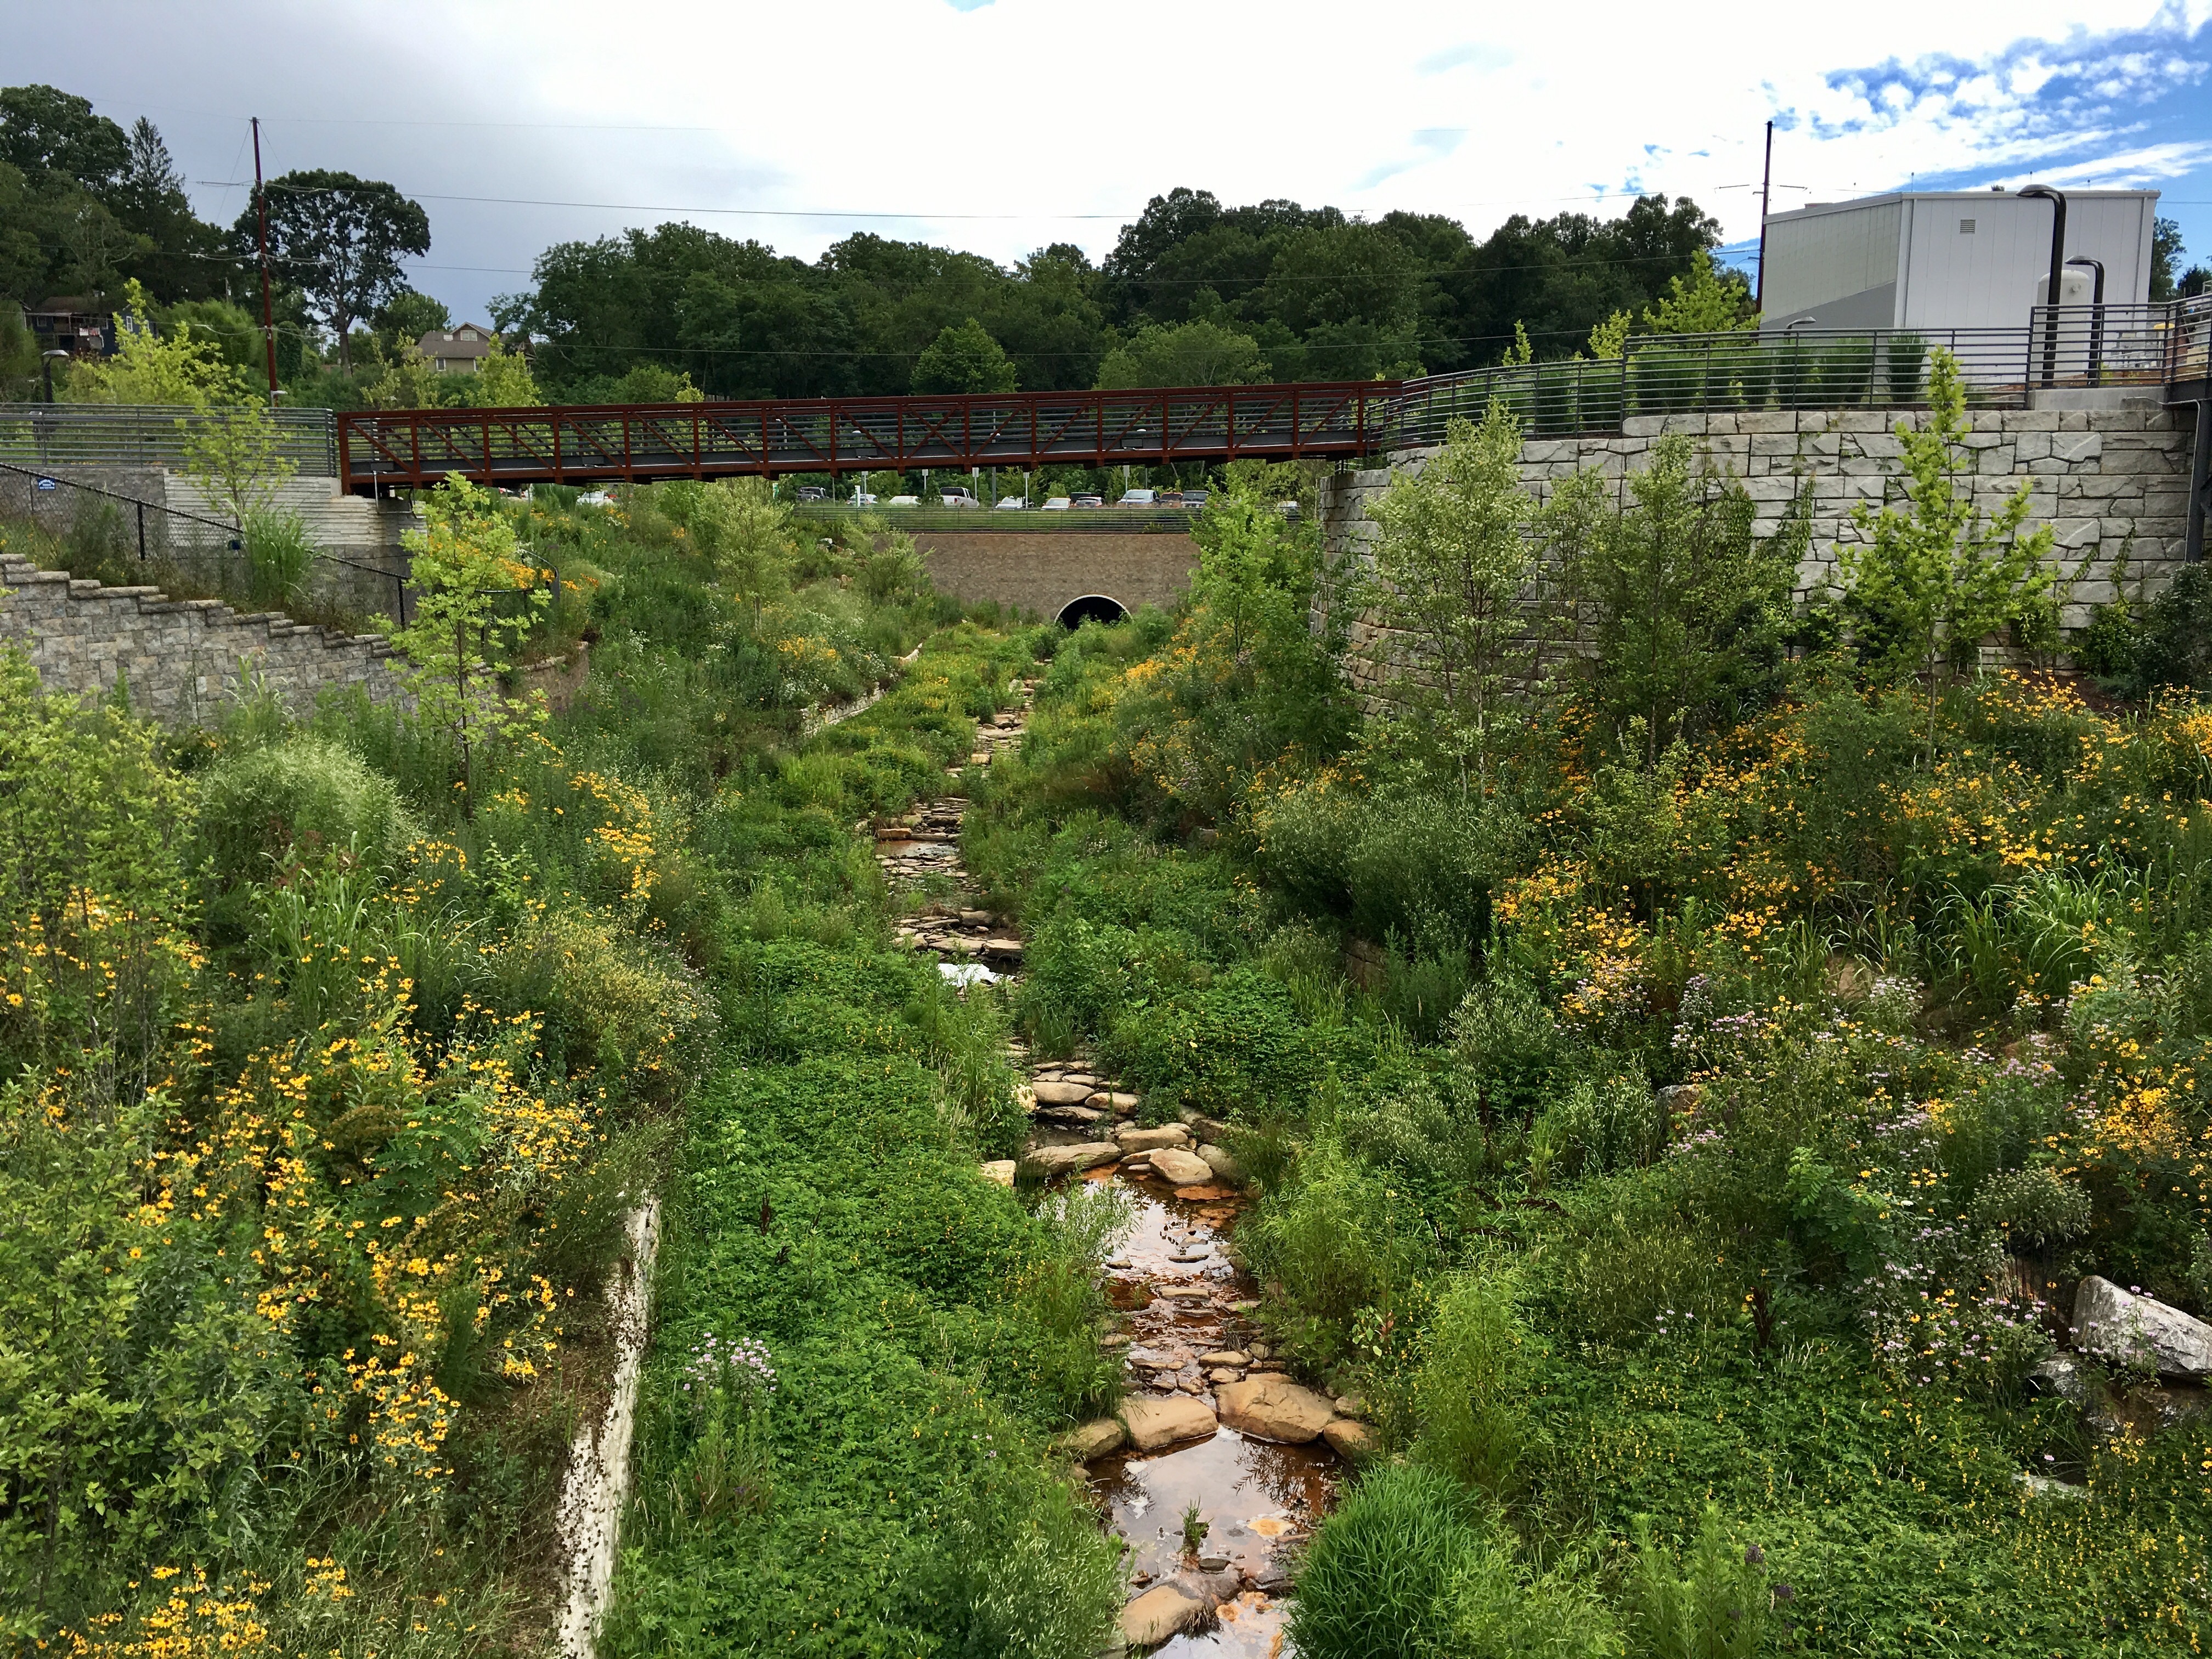 Lush pollinator habitat created on a brownfield site in Asheville, North Carolina, by the New Belgium brewery.